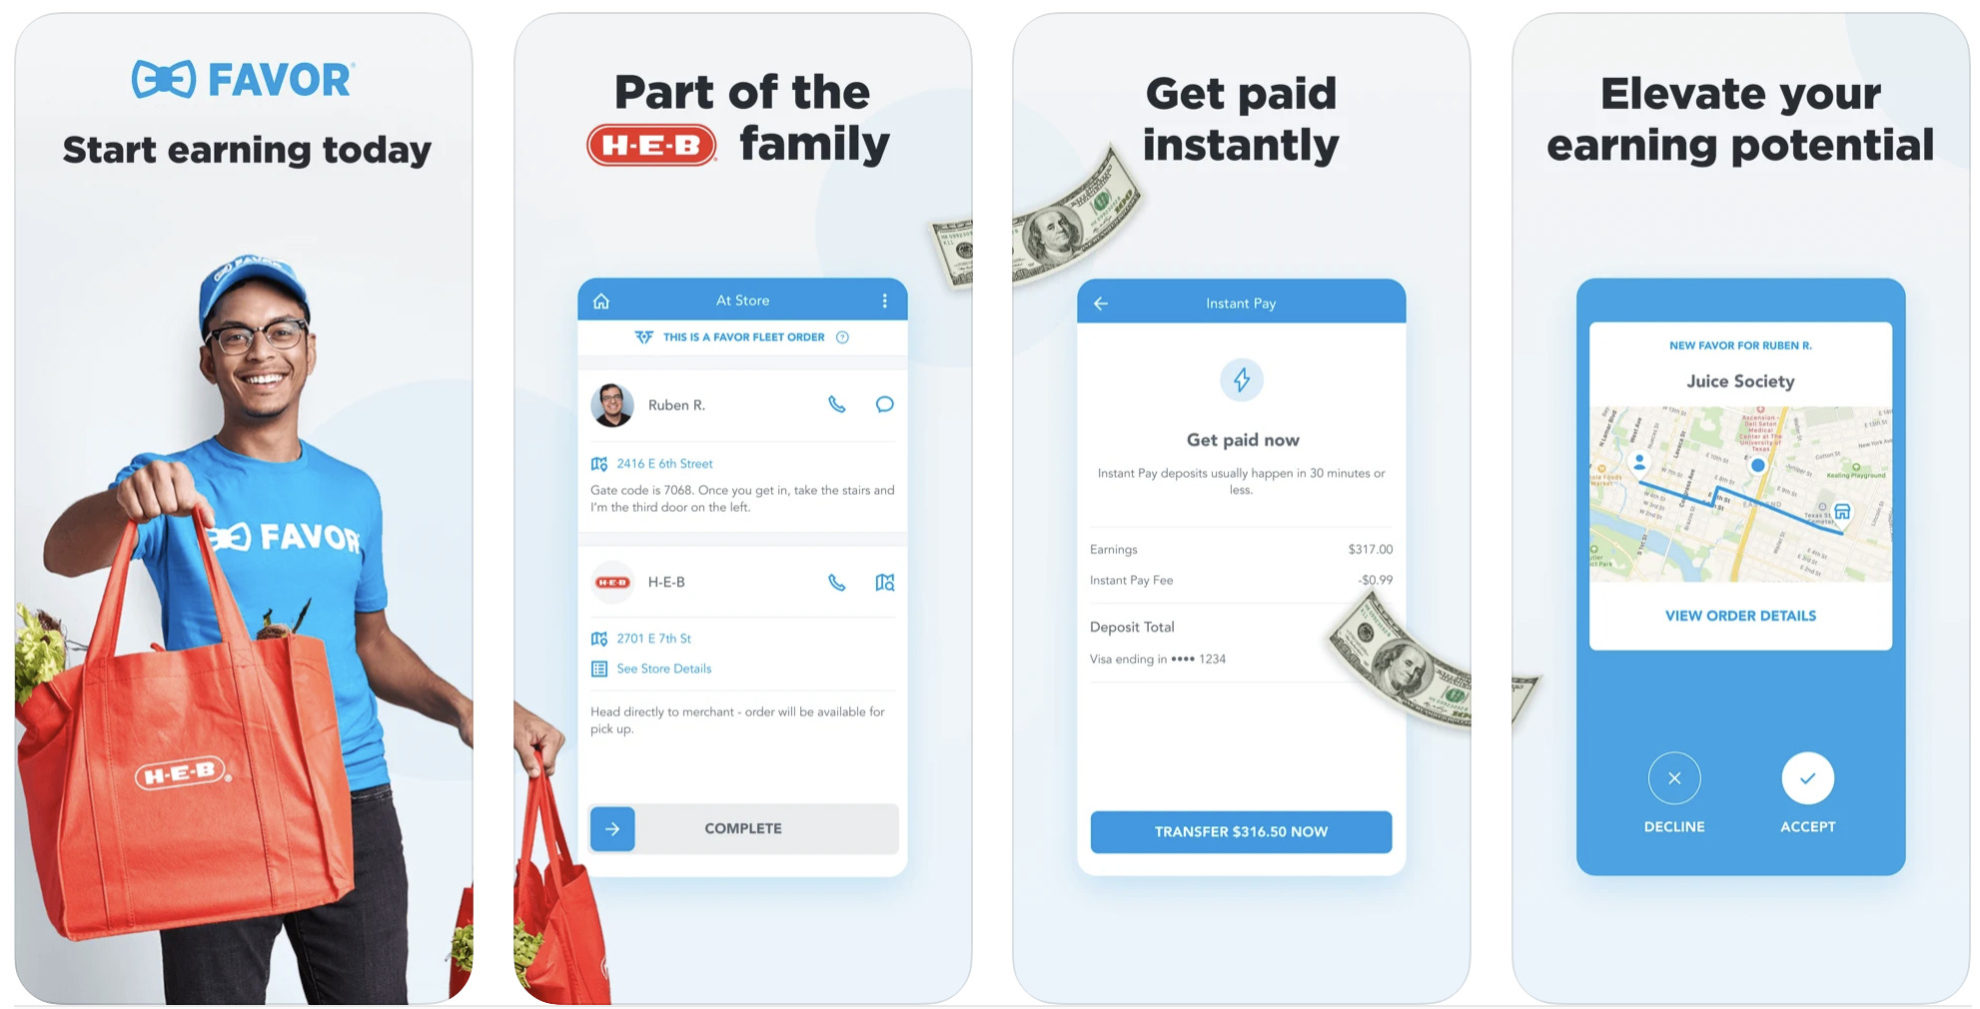 Favor Runner Review – Requirements, Pay, Benefits, & More